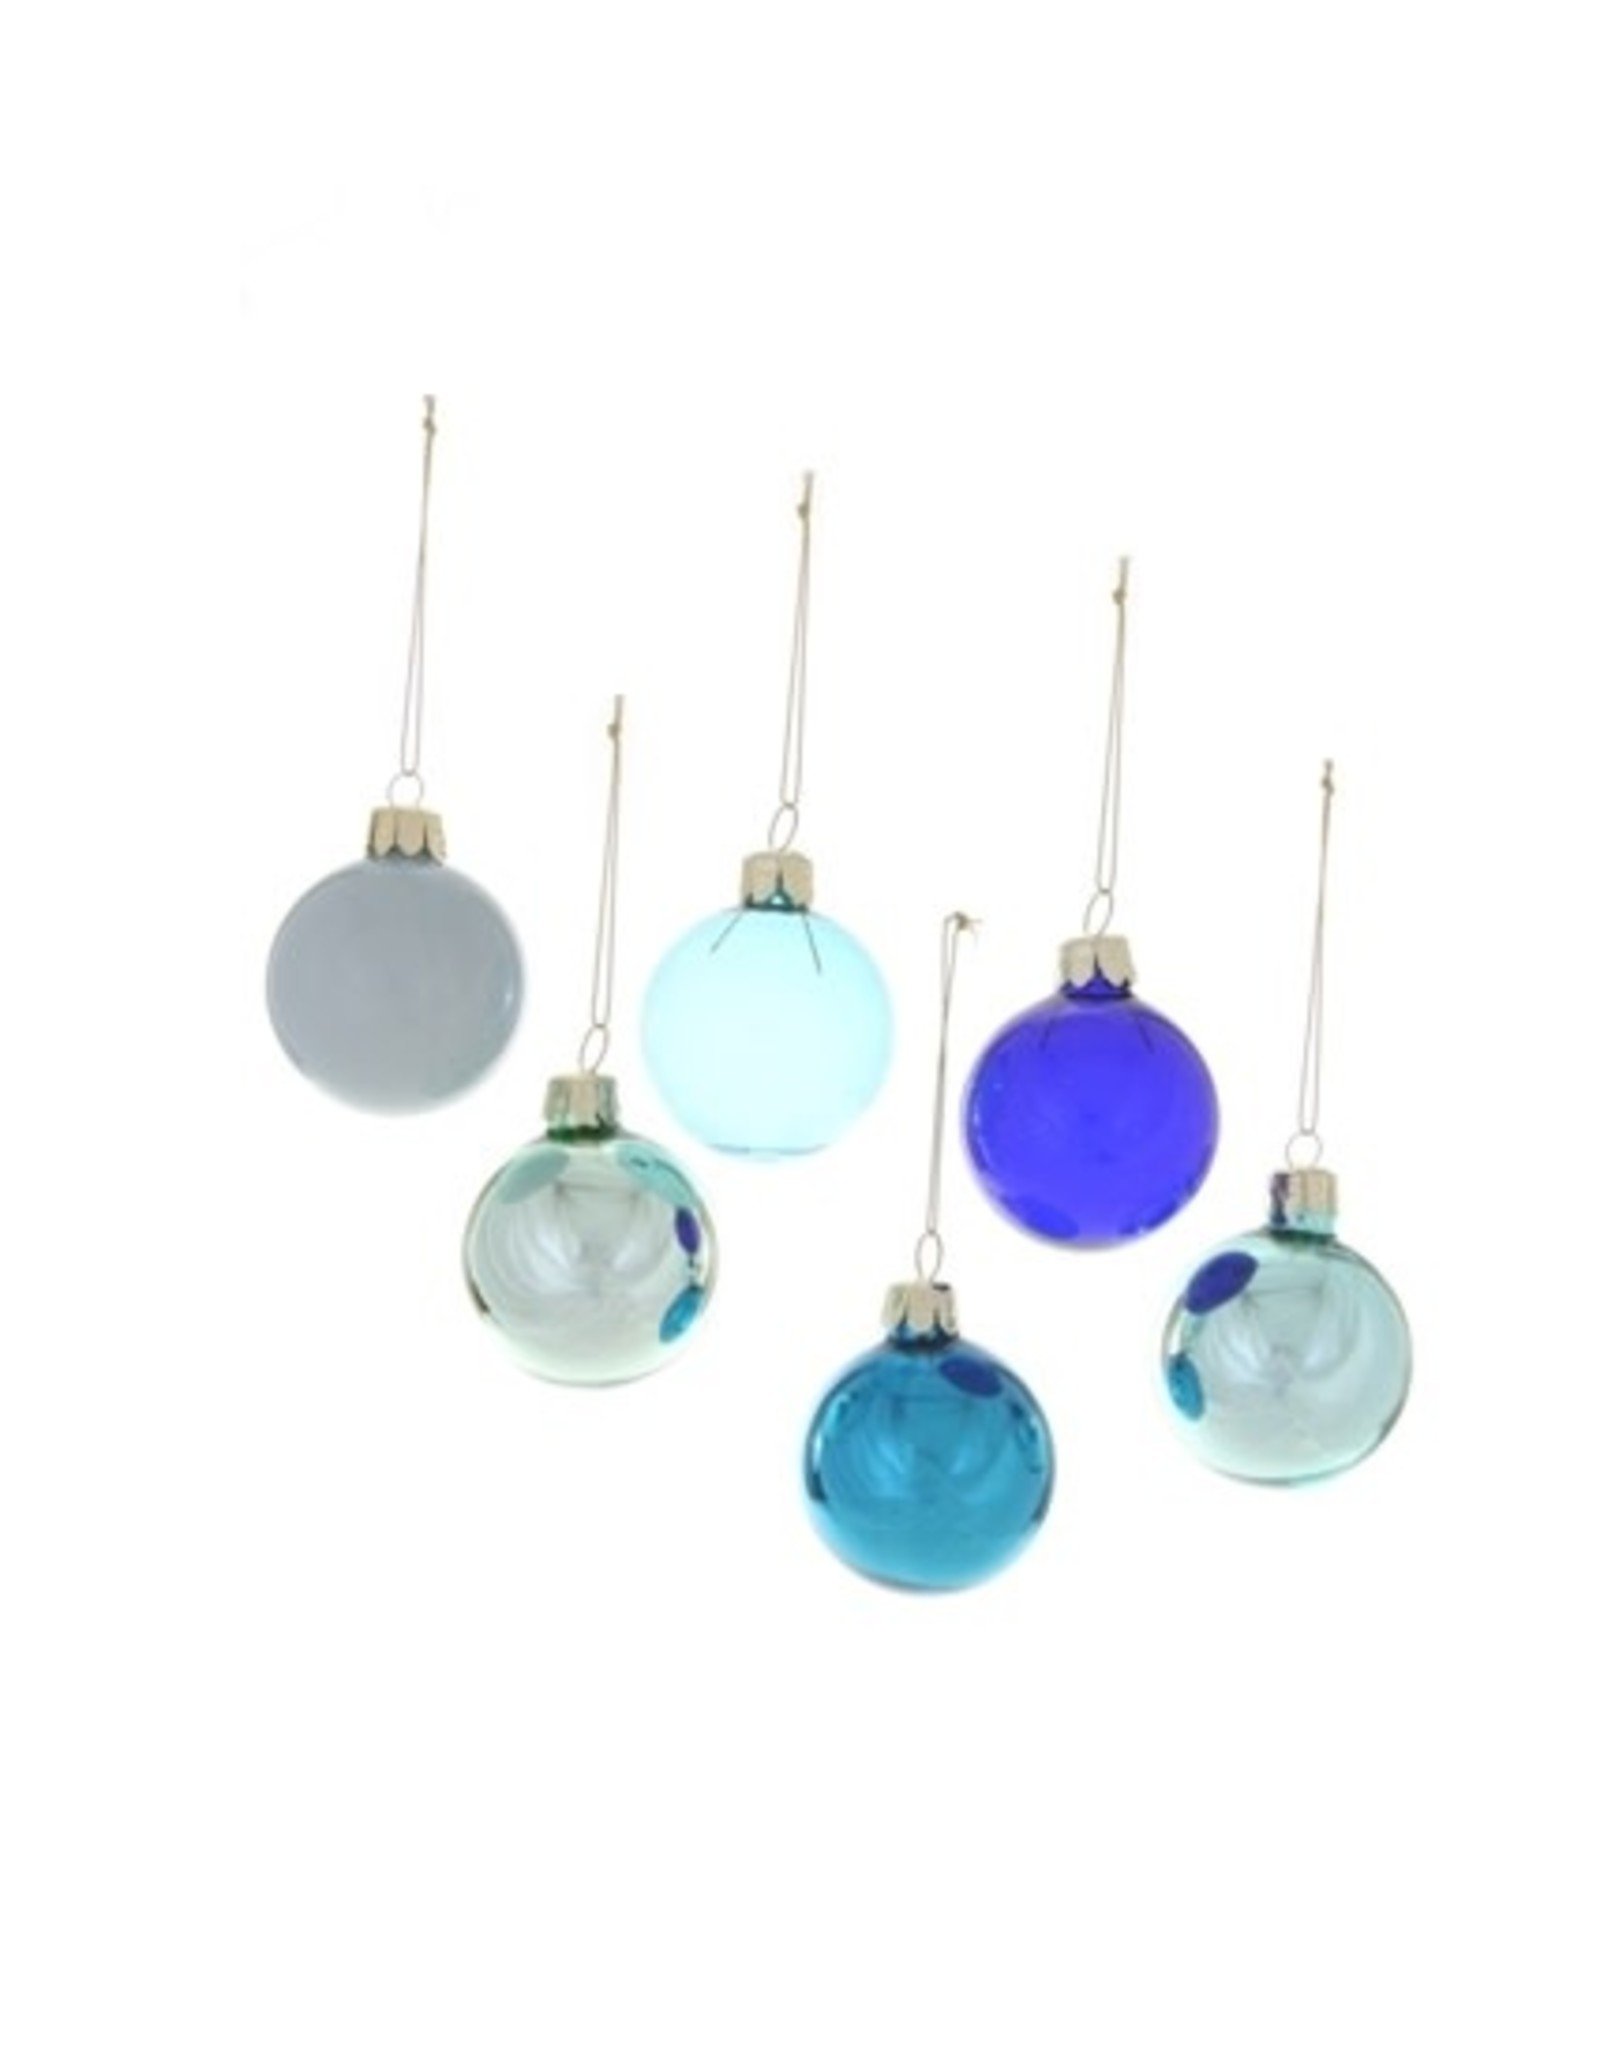 Cody Foster & Co. SMALL BLUE HUE ORNAMENTS - 6 STYLES